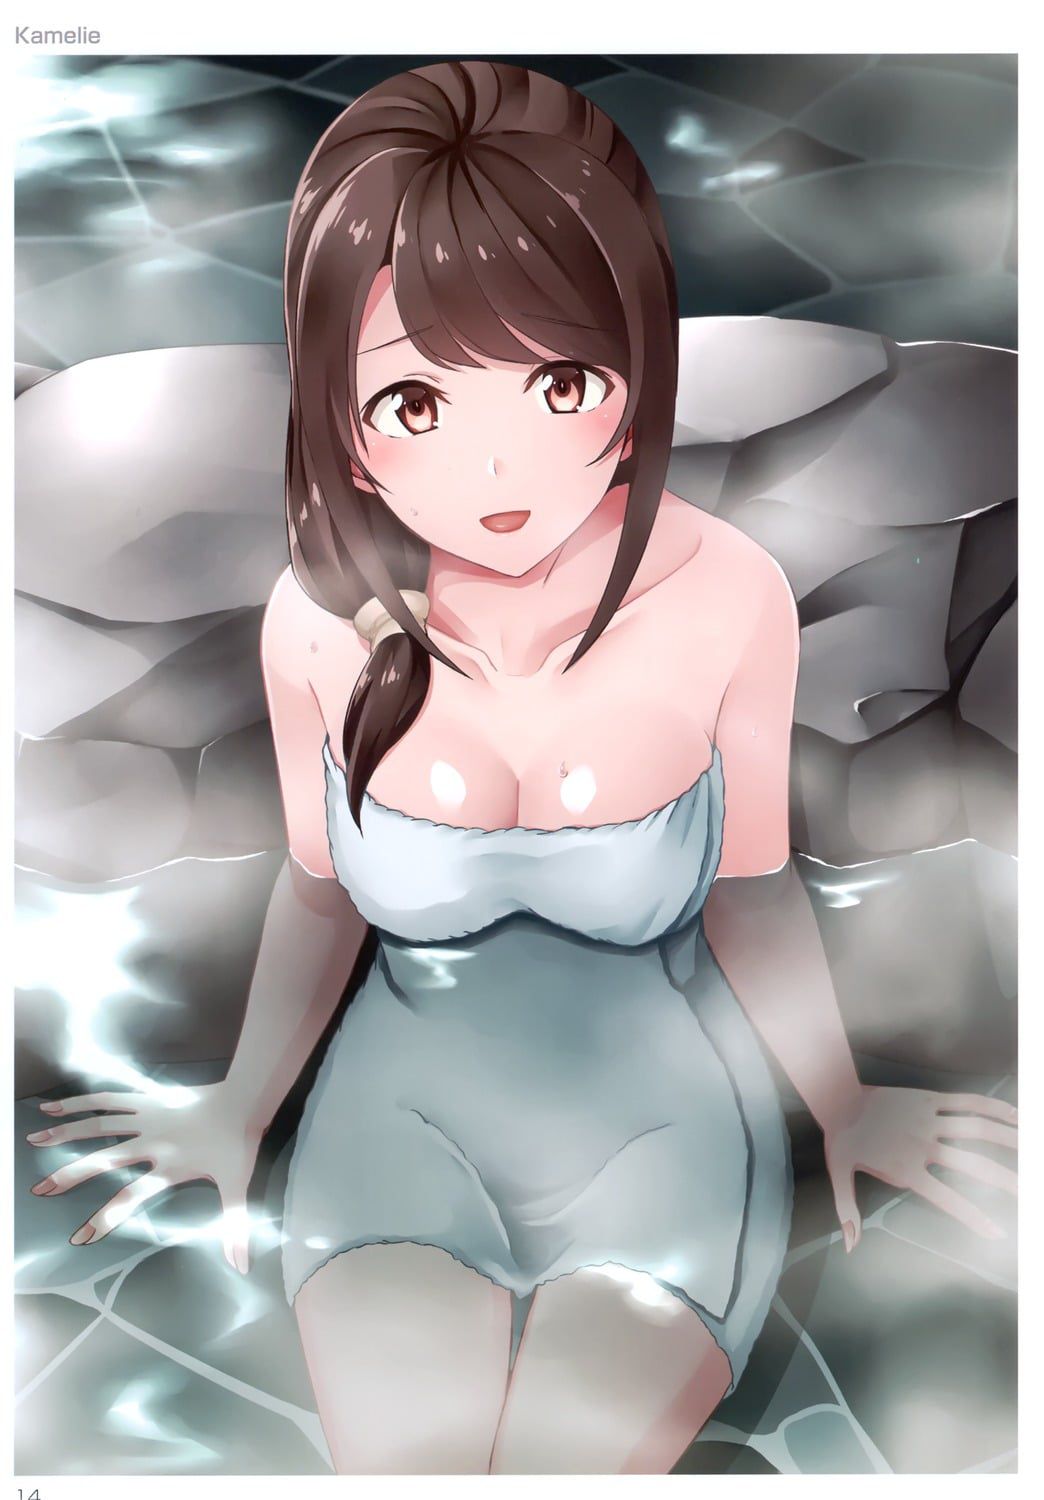 Let's gaze at the bath scene of a defenseless girl during relaxation time! 17